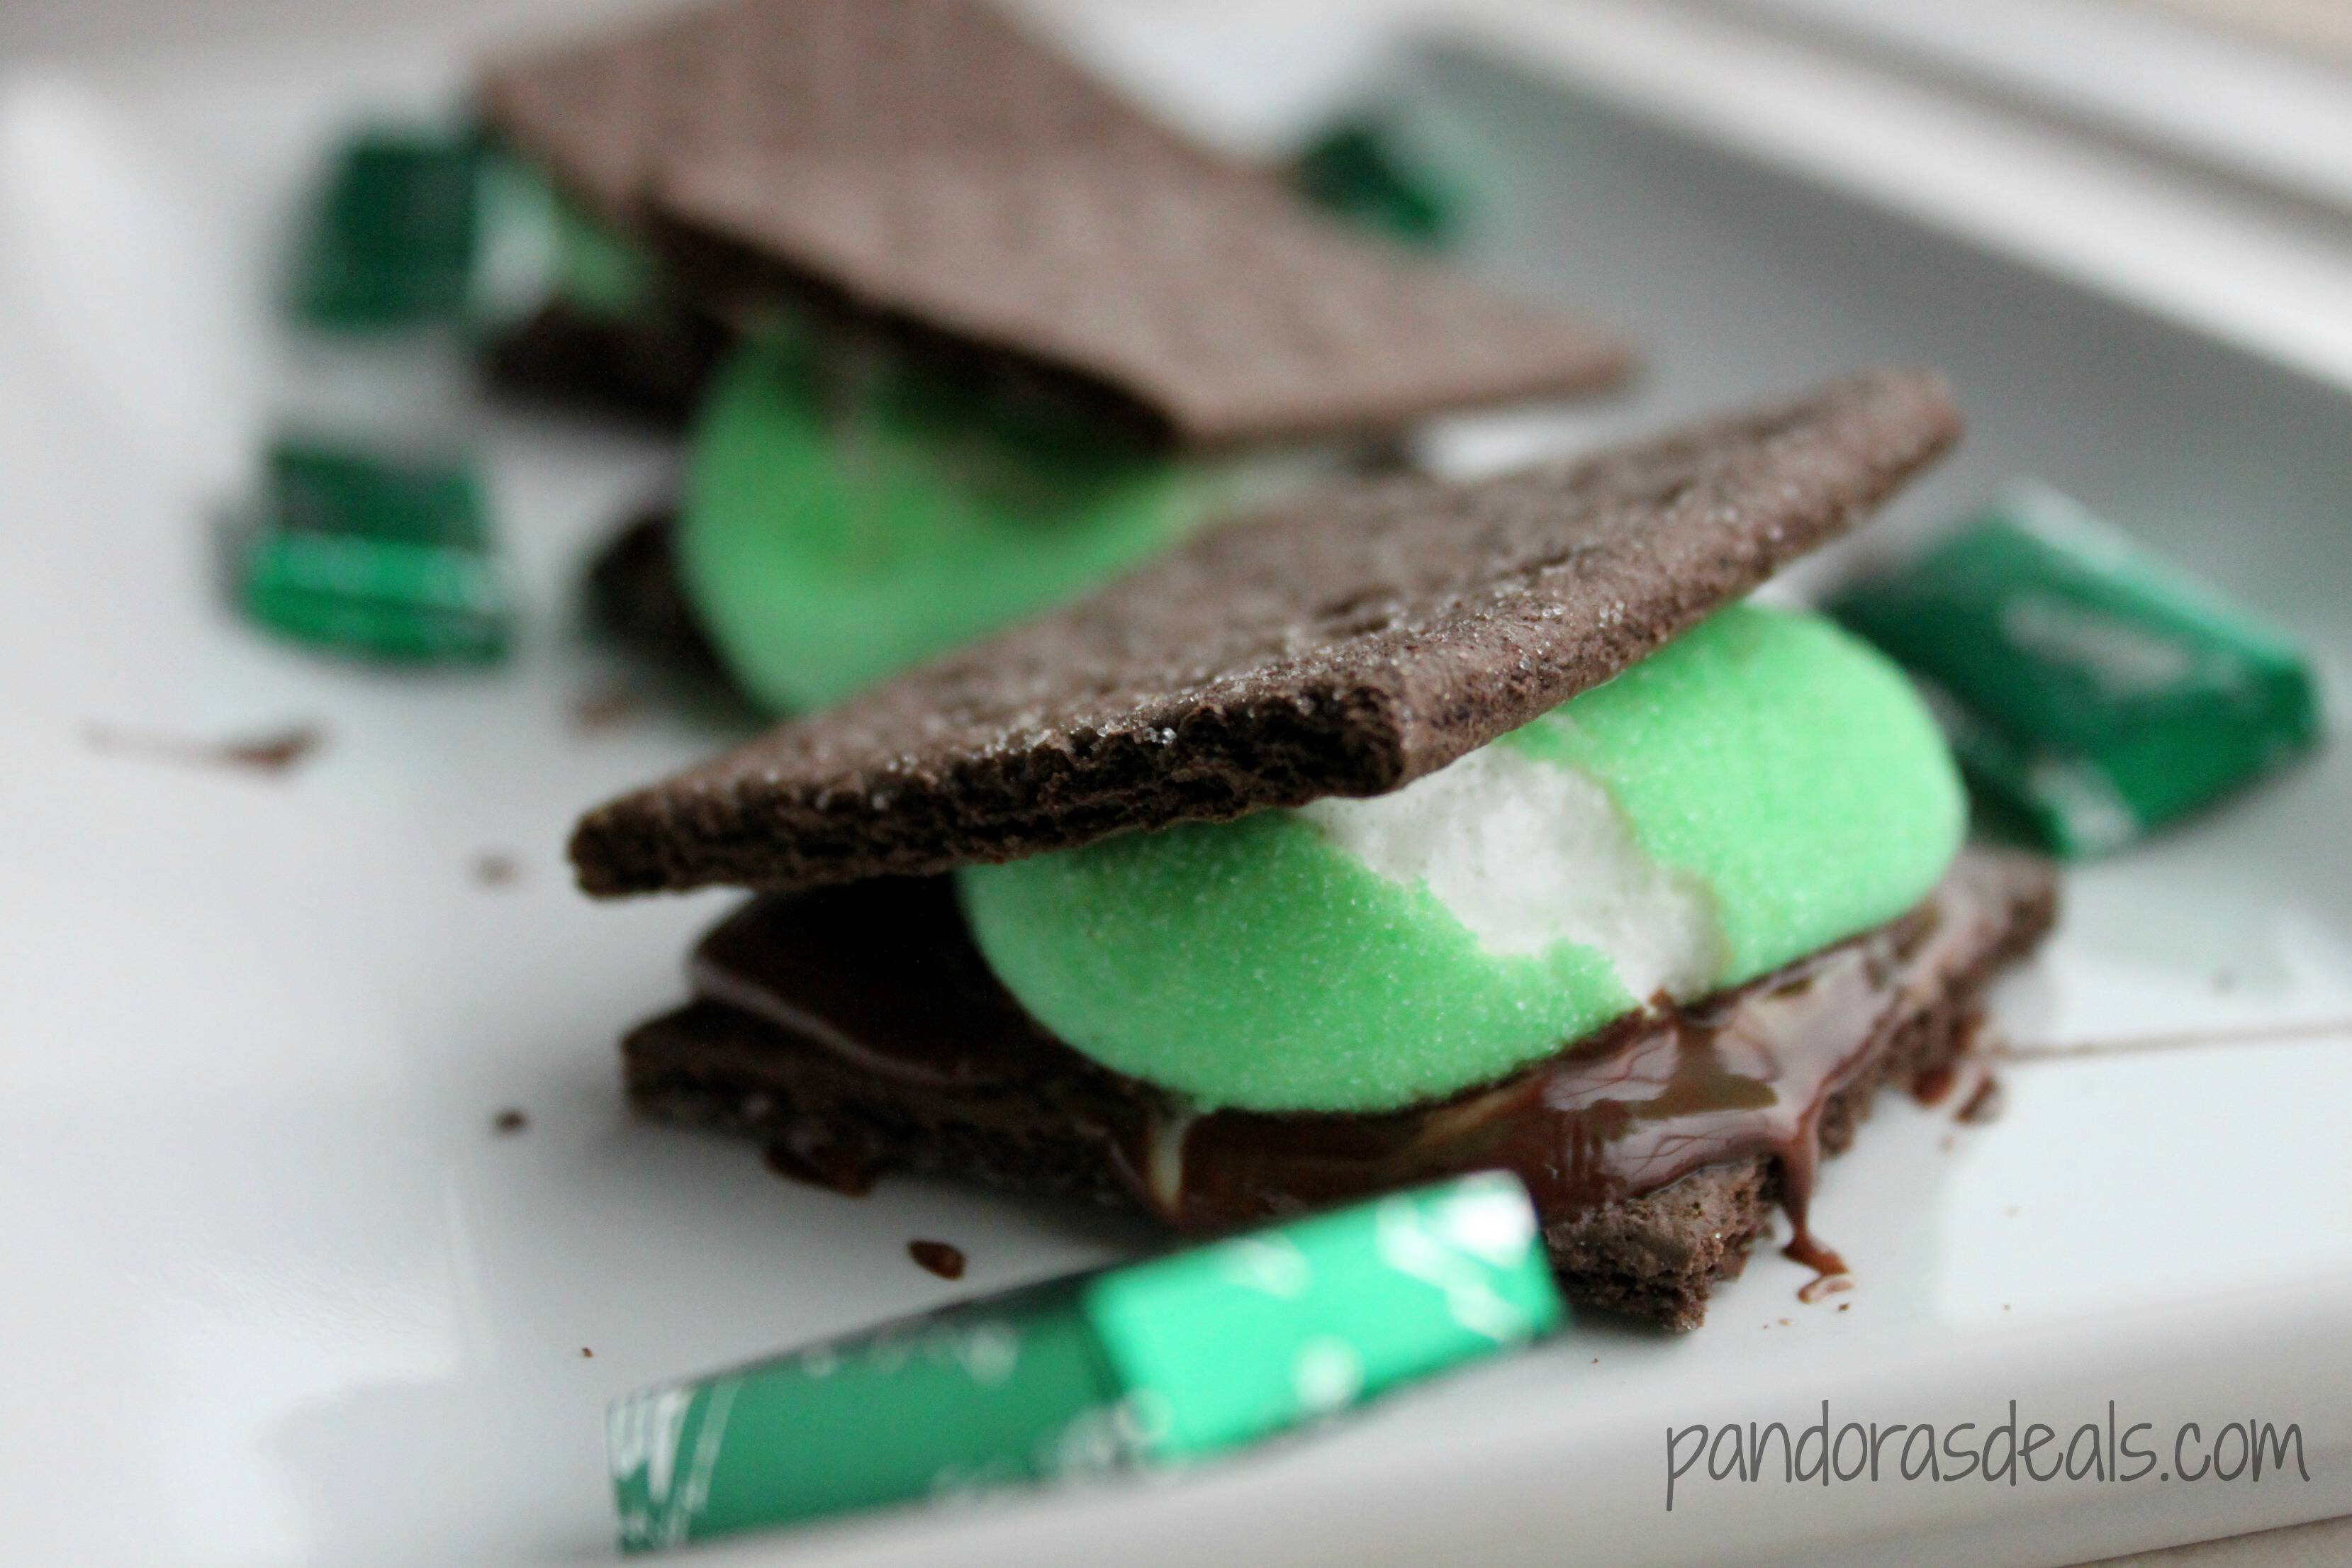 These couldn't be easier to make or more sticky sweet chocolate goodness! Here's the quick and easy way to whip up St. Patty's Day Minty S'mores!